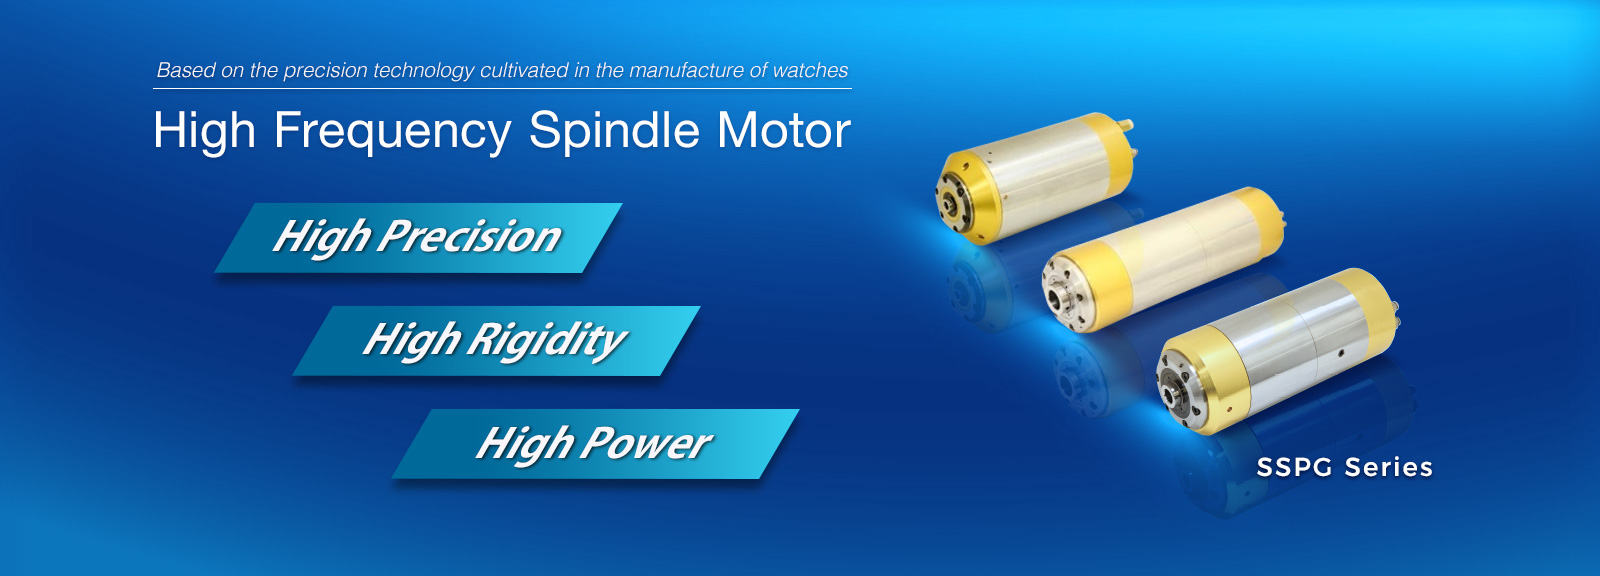 Hight Frequency Spindle Motor